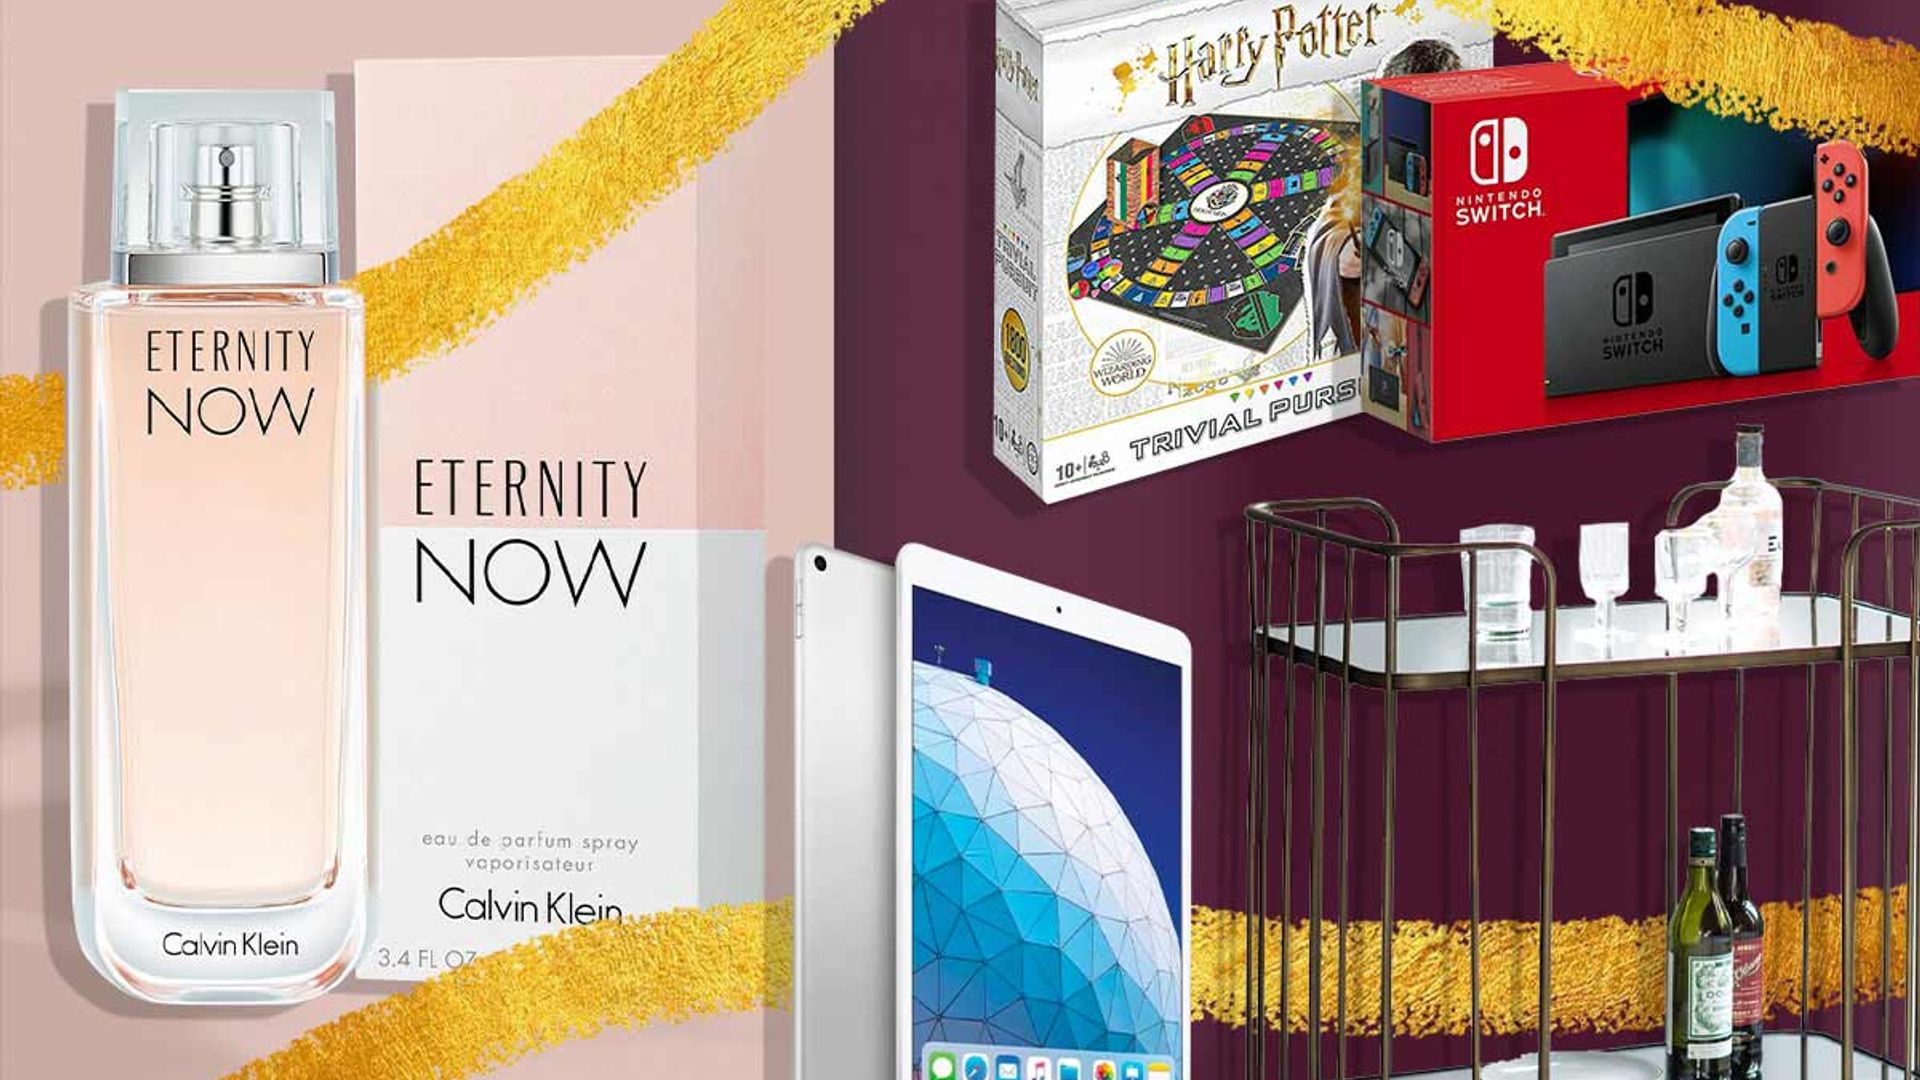 eBay is our secret one-stop shop for Christmas gifts for the whole family - here's what to buy